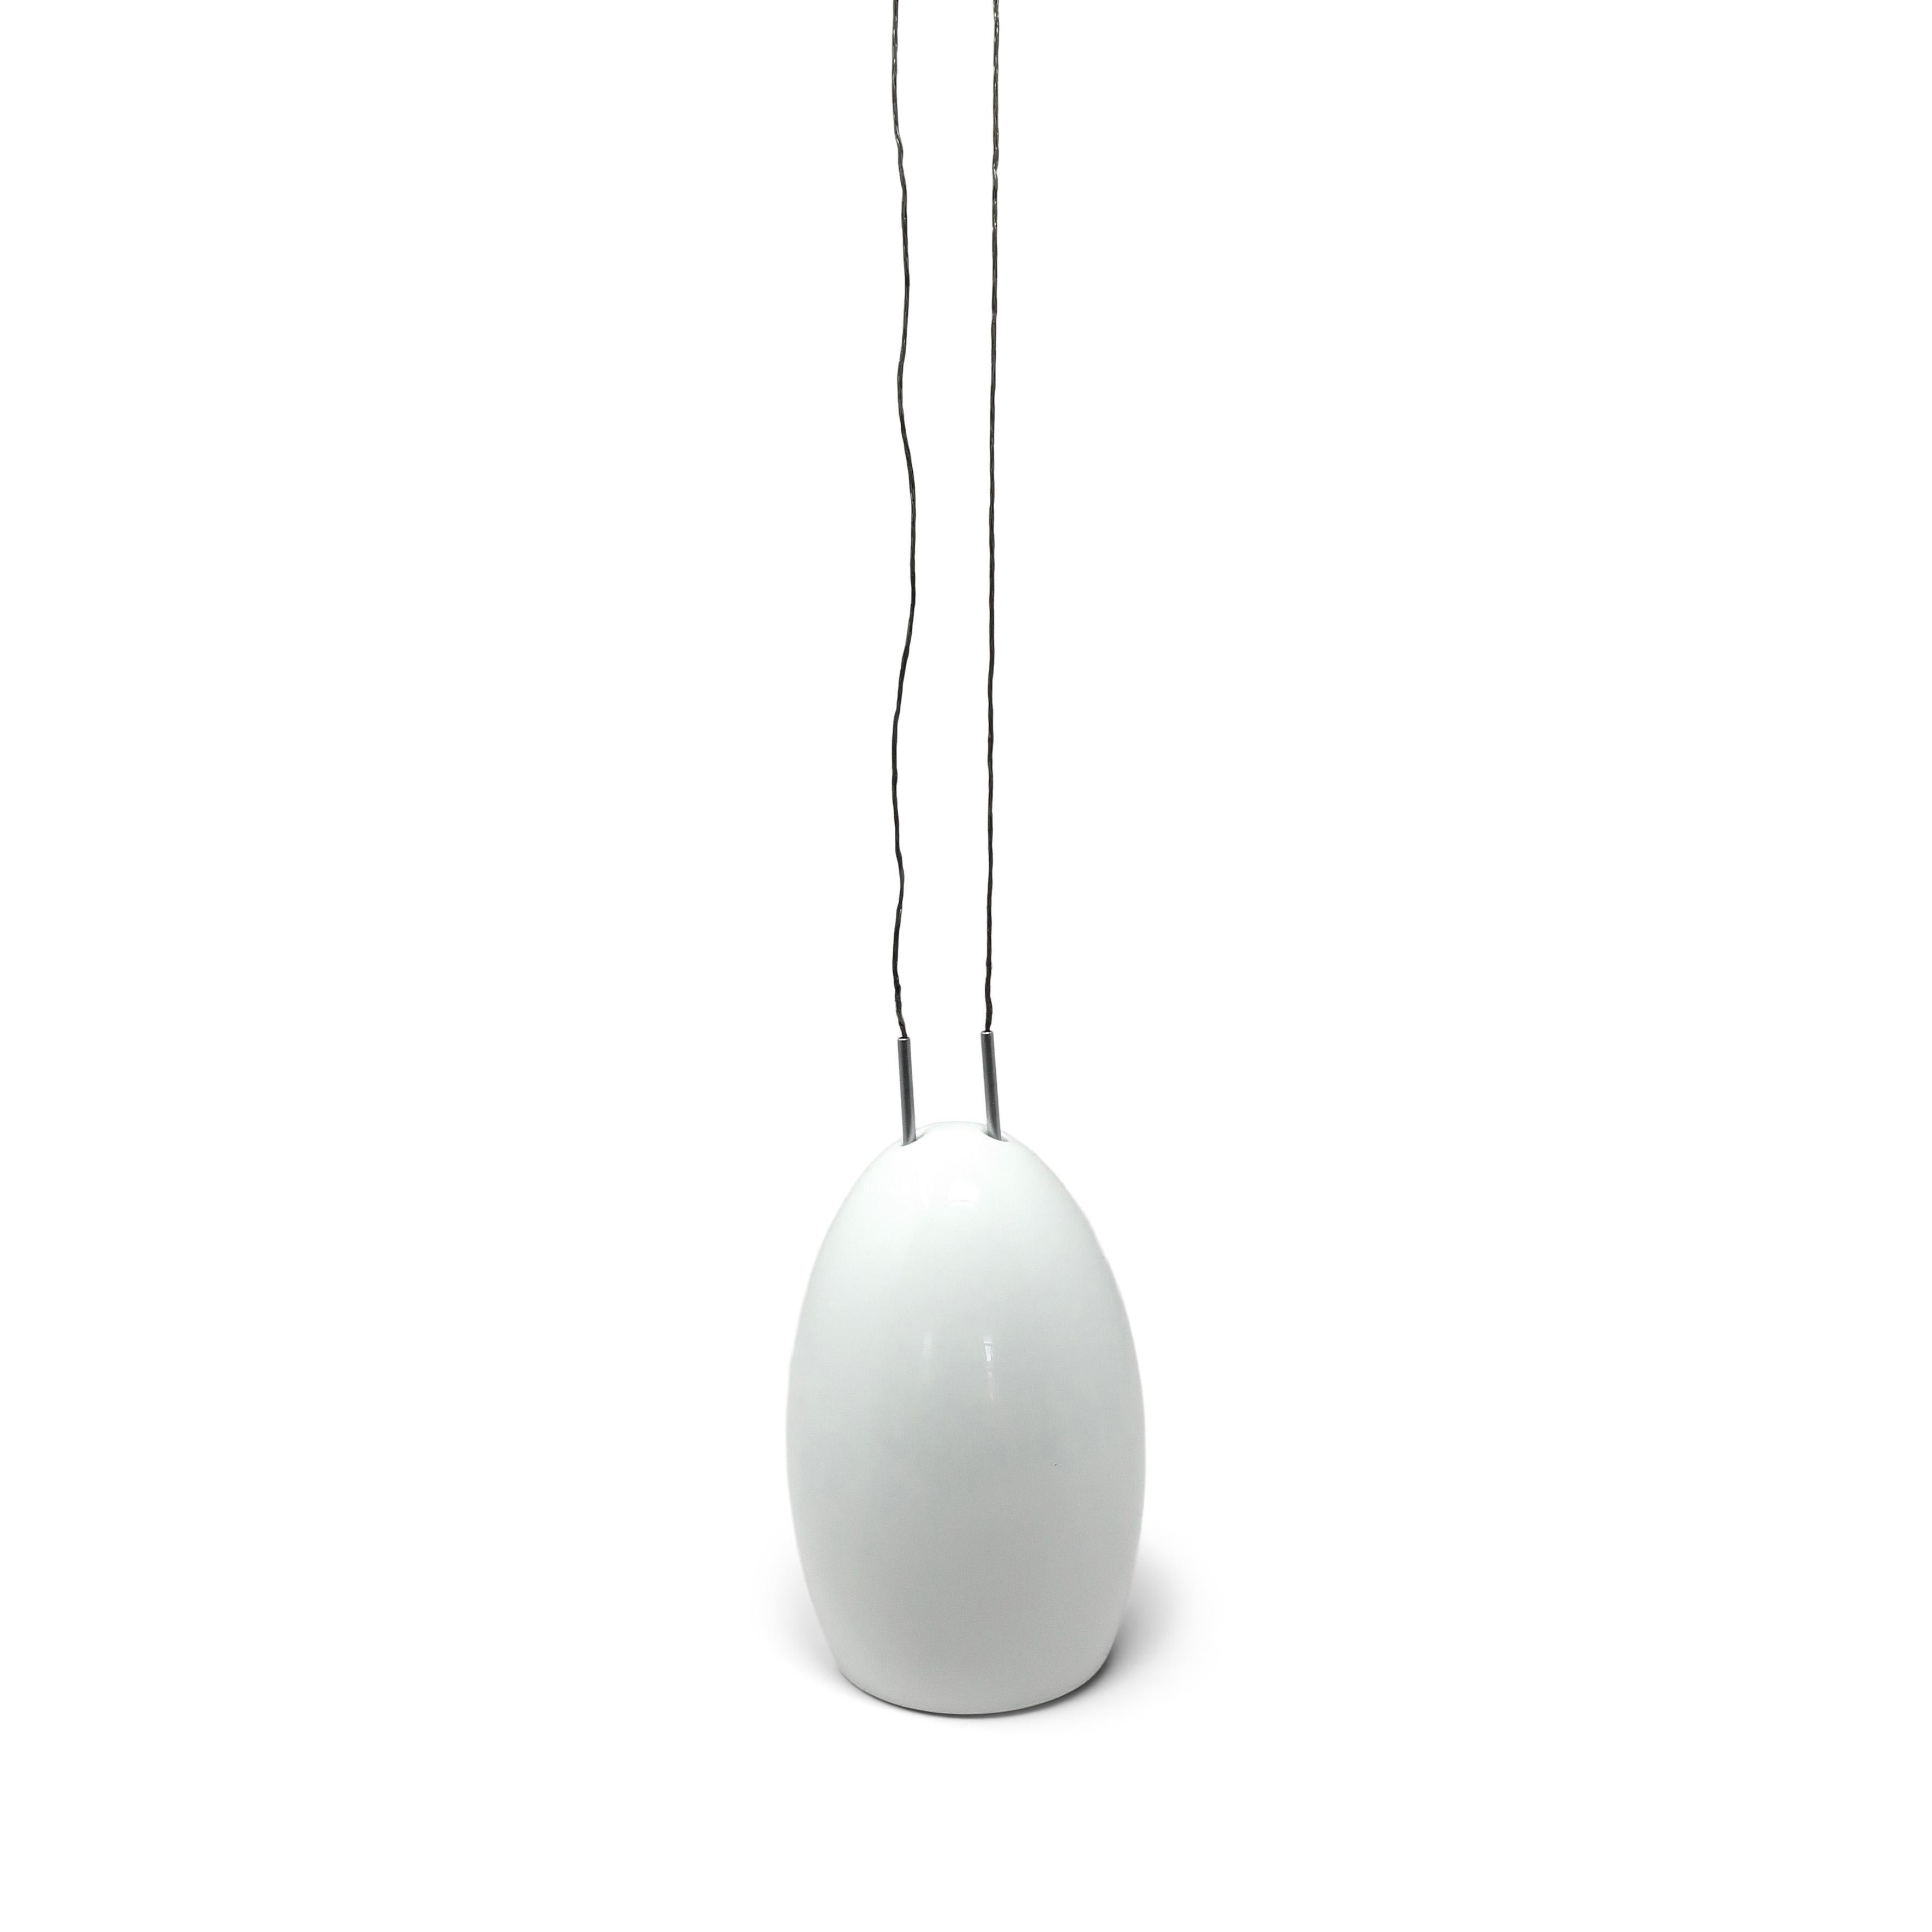 From the Tobias Grau designed Oh China Collection produced by Grau's eponymous company, the Oh pendant lamp is made of fine bone china in a simple and beautiful form. Suspended on two cables and height-adjustable, the egg shaped shade can go up or